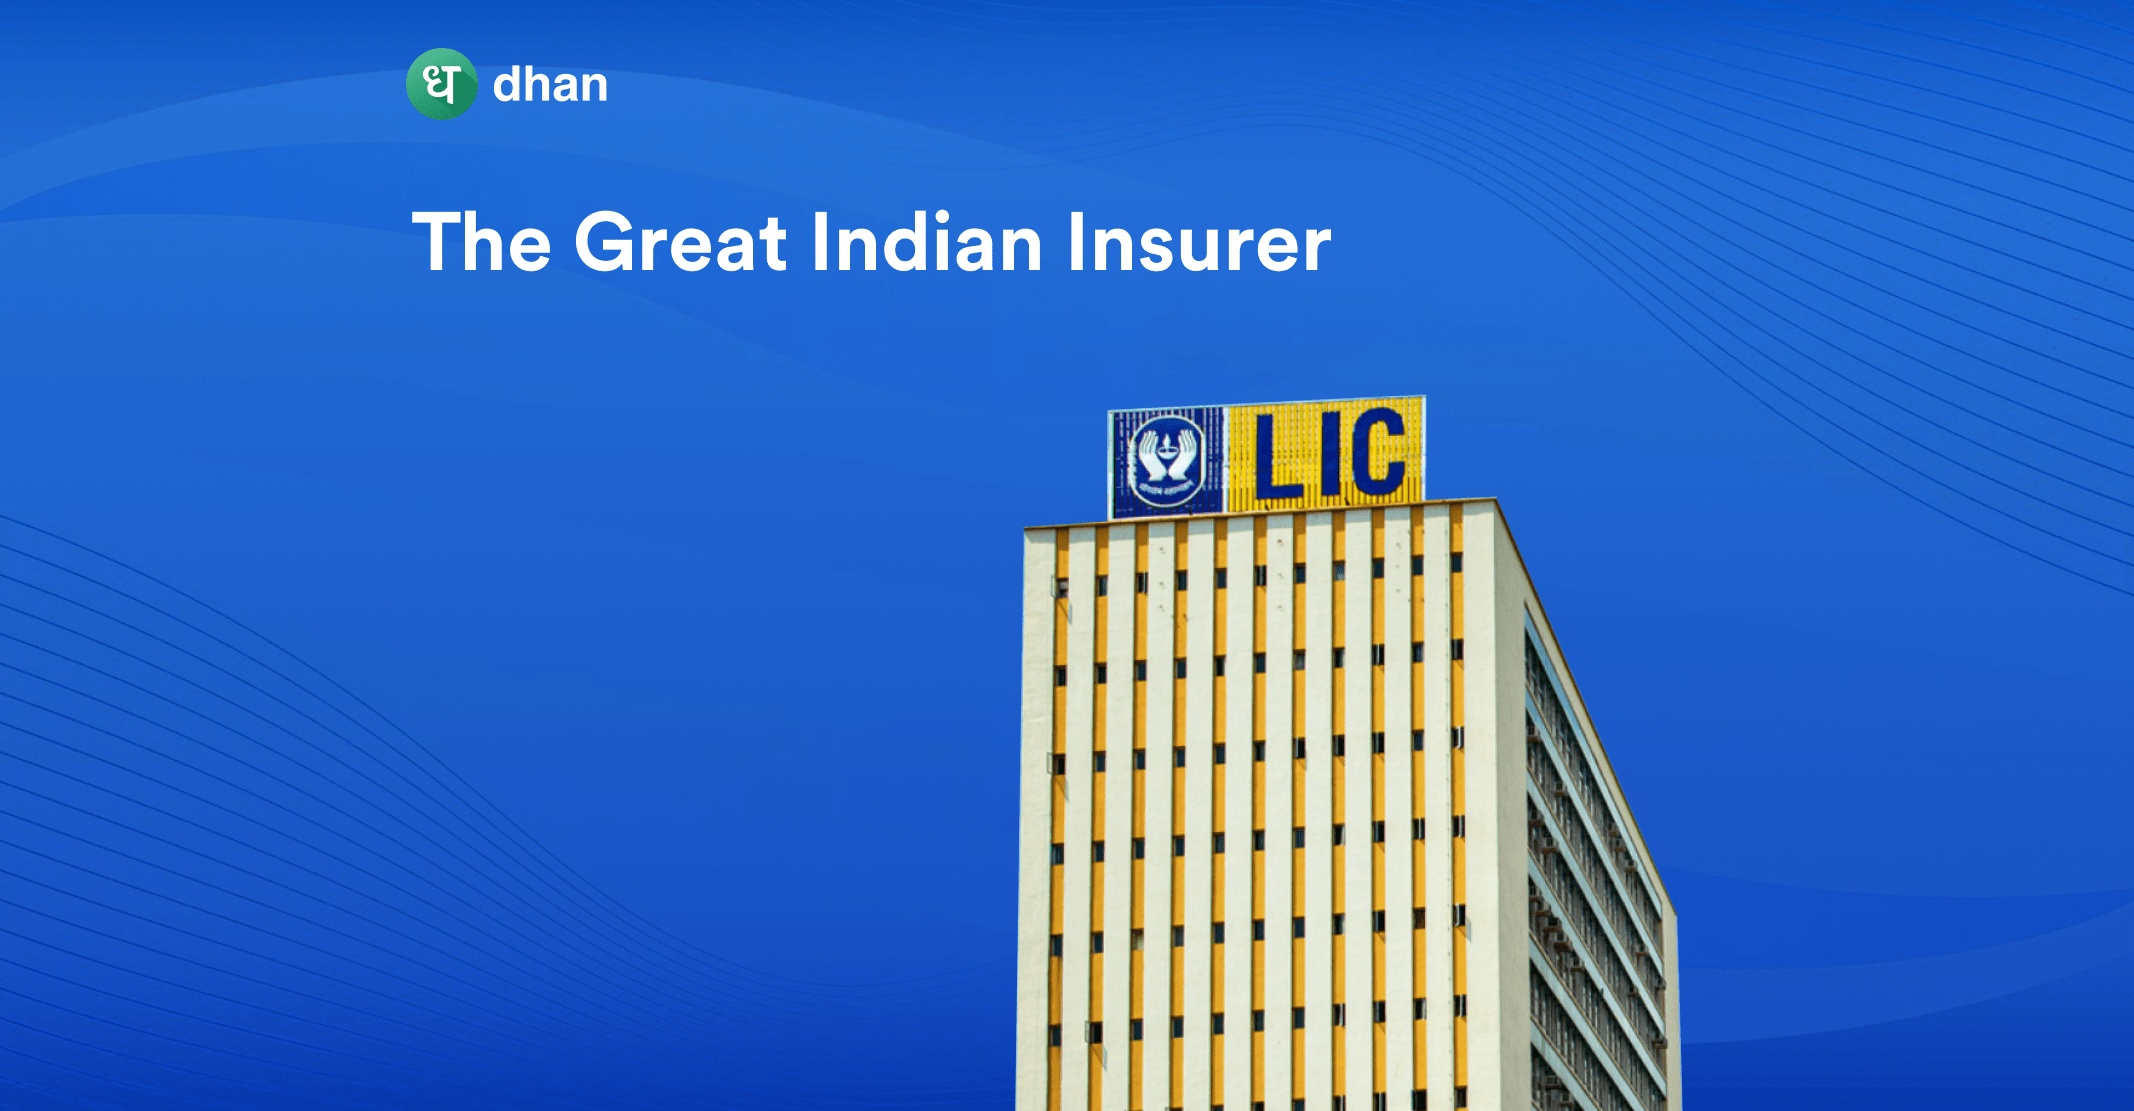 Life Insurance Corporation of India - The Great Indian Insurer